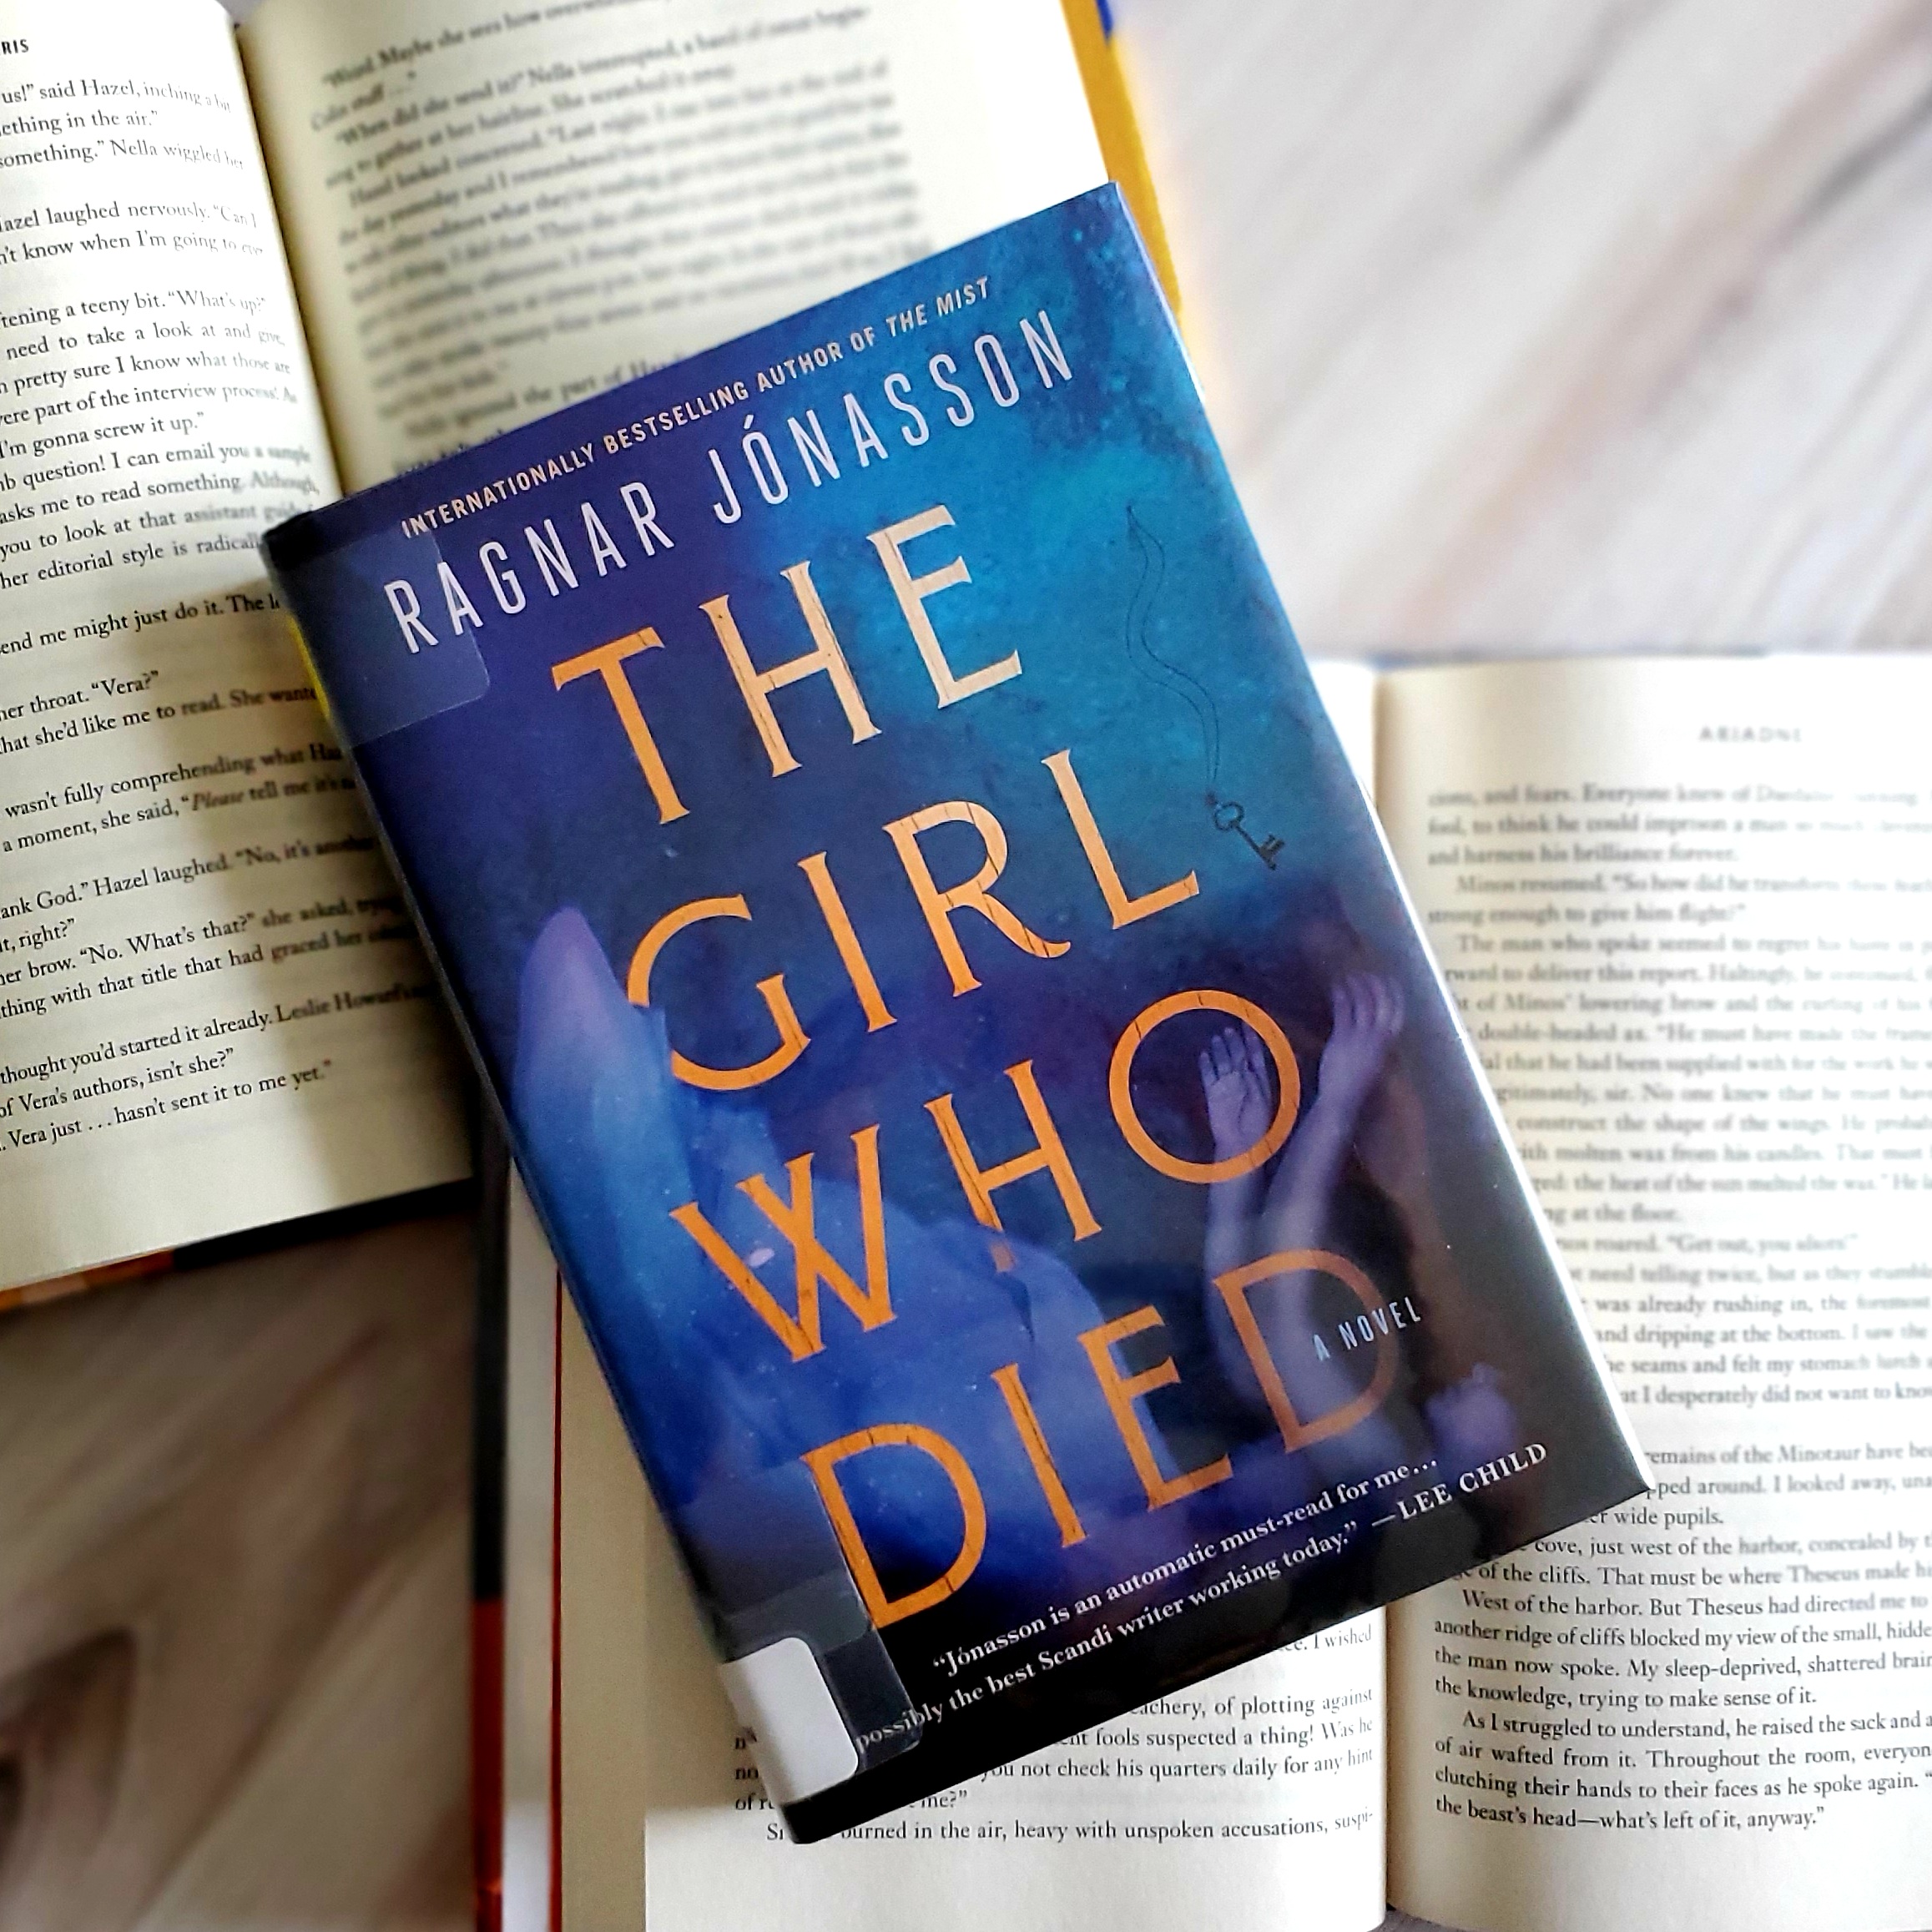 Book Review of THE GIRL WHO DIED